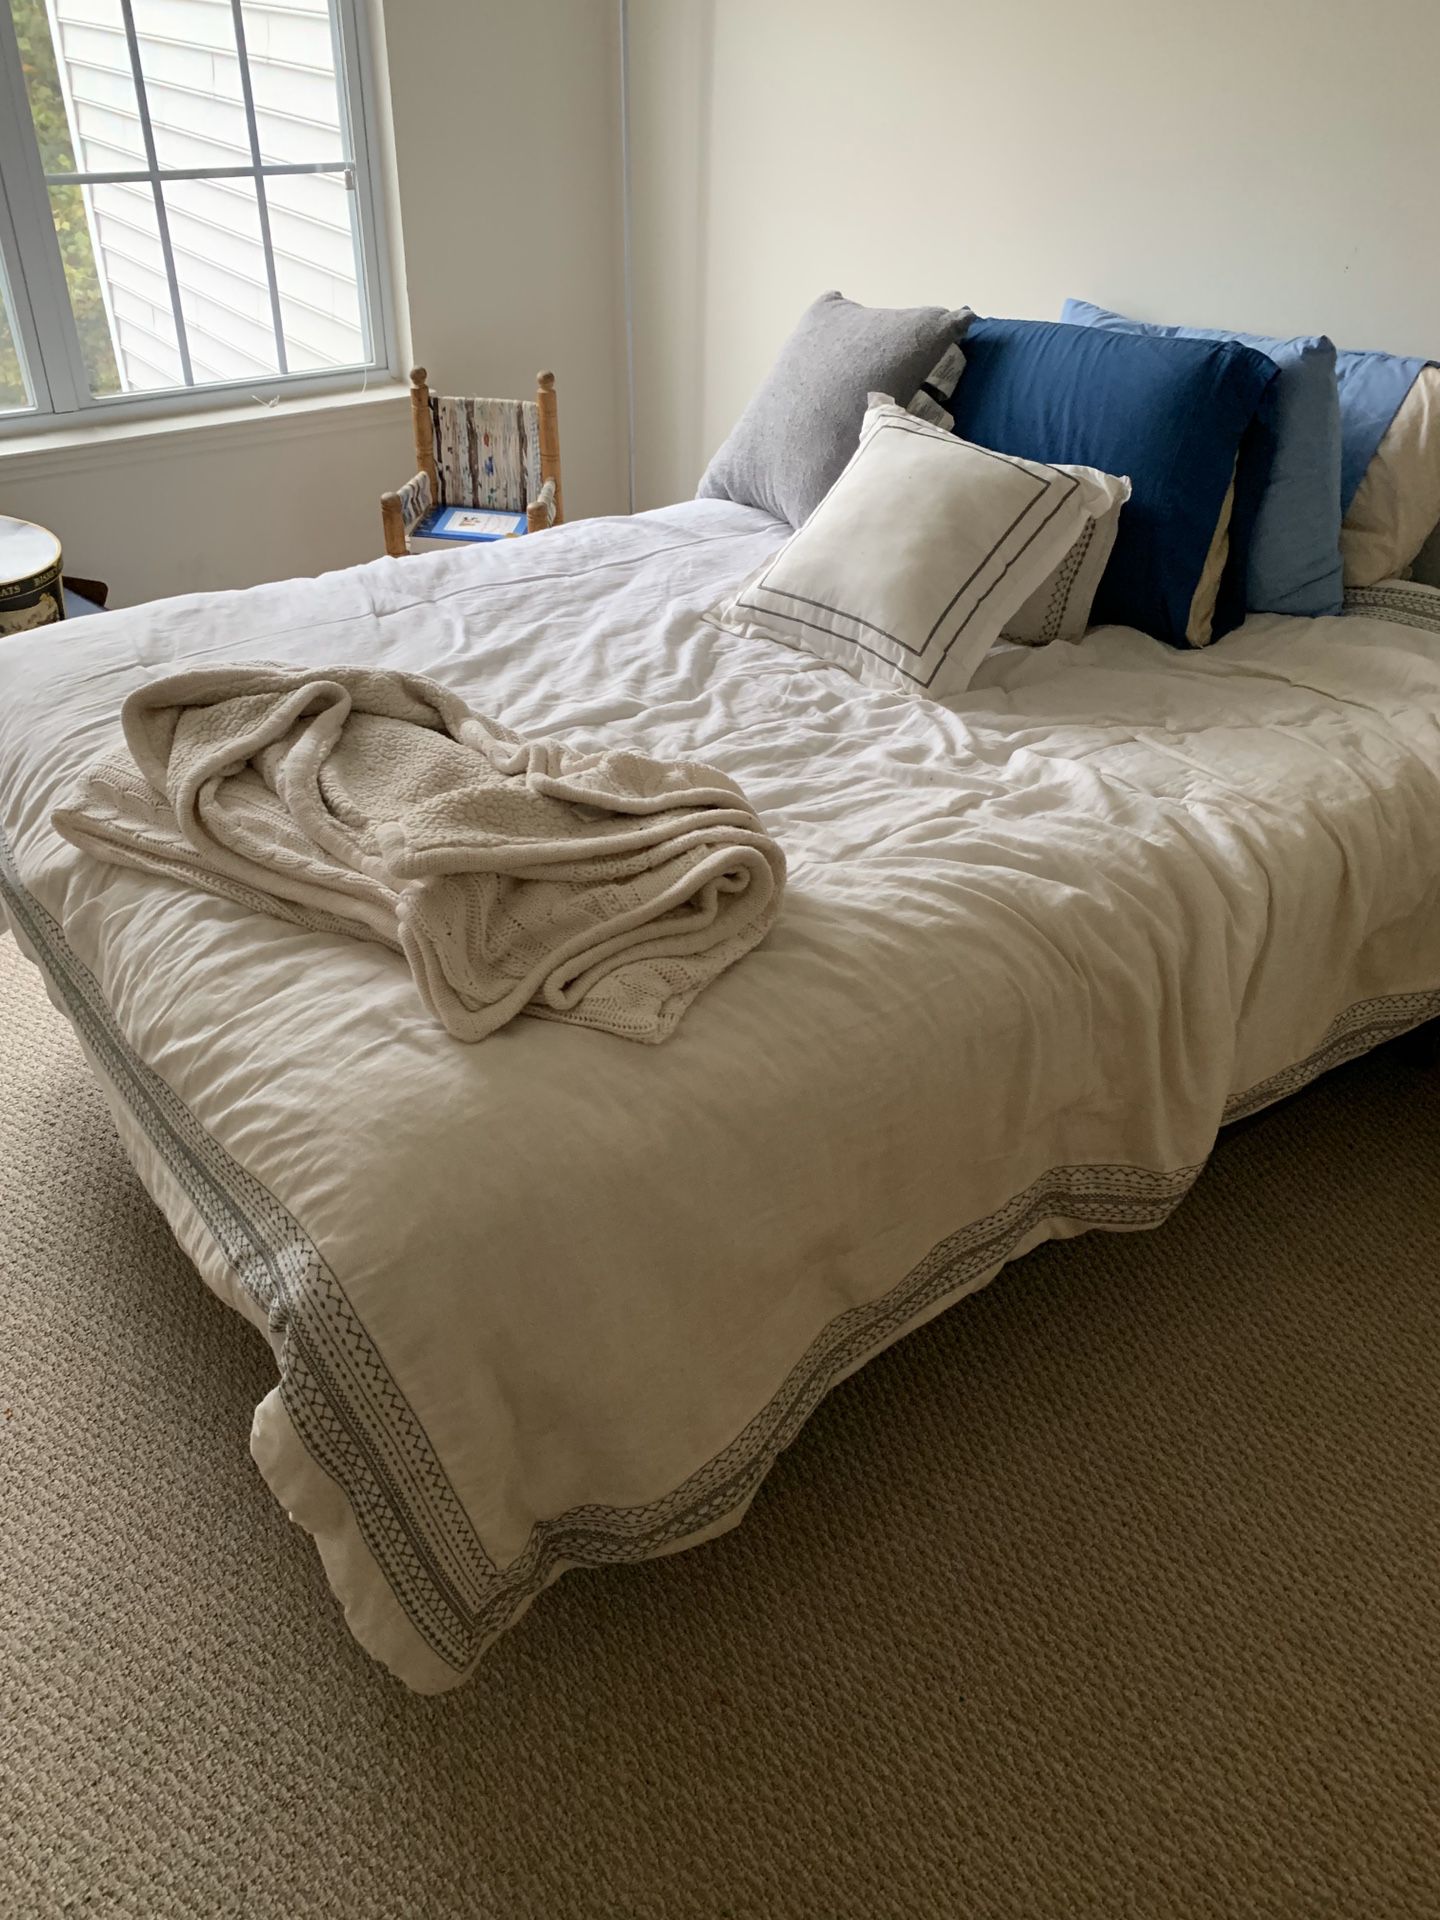 Free Full Size Bed